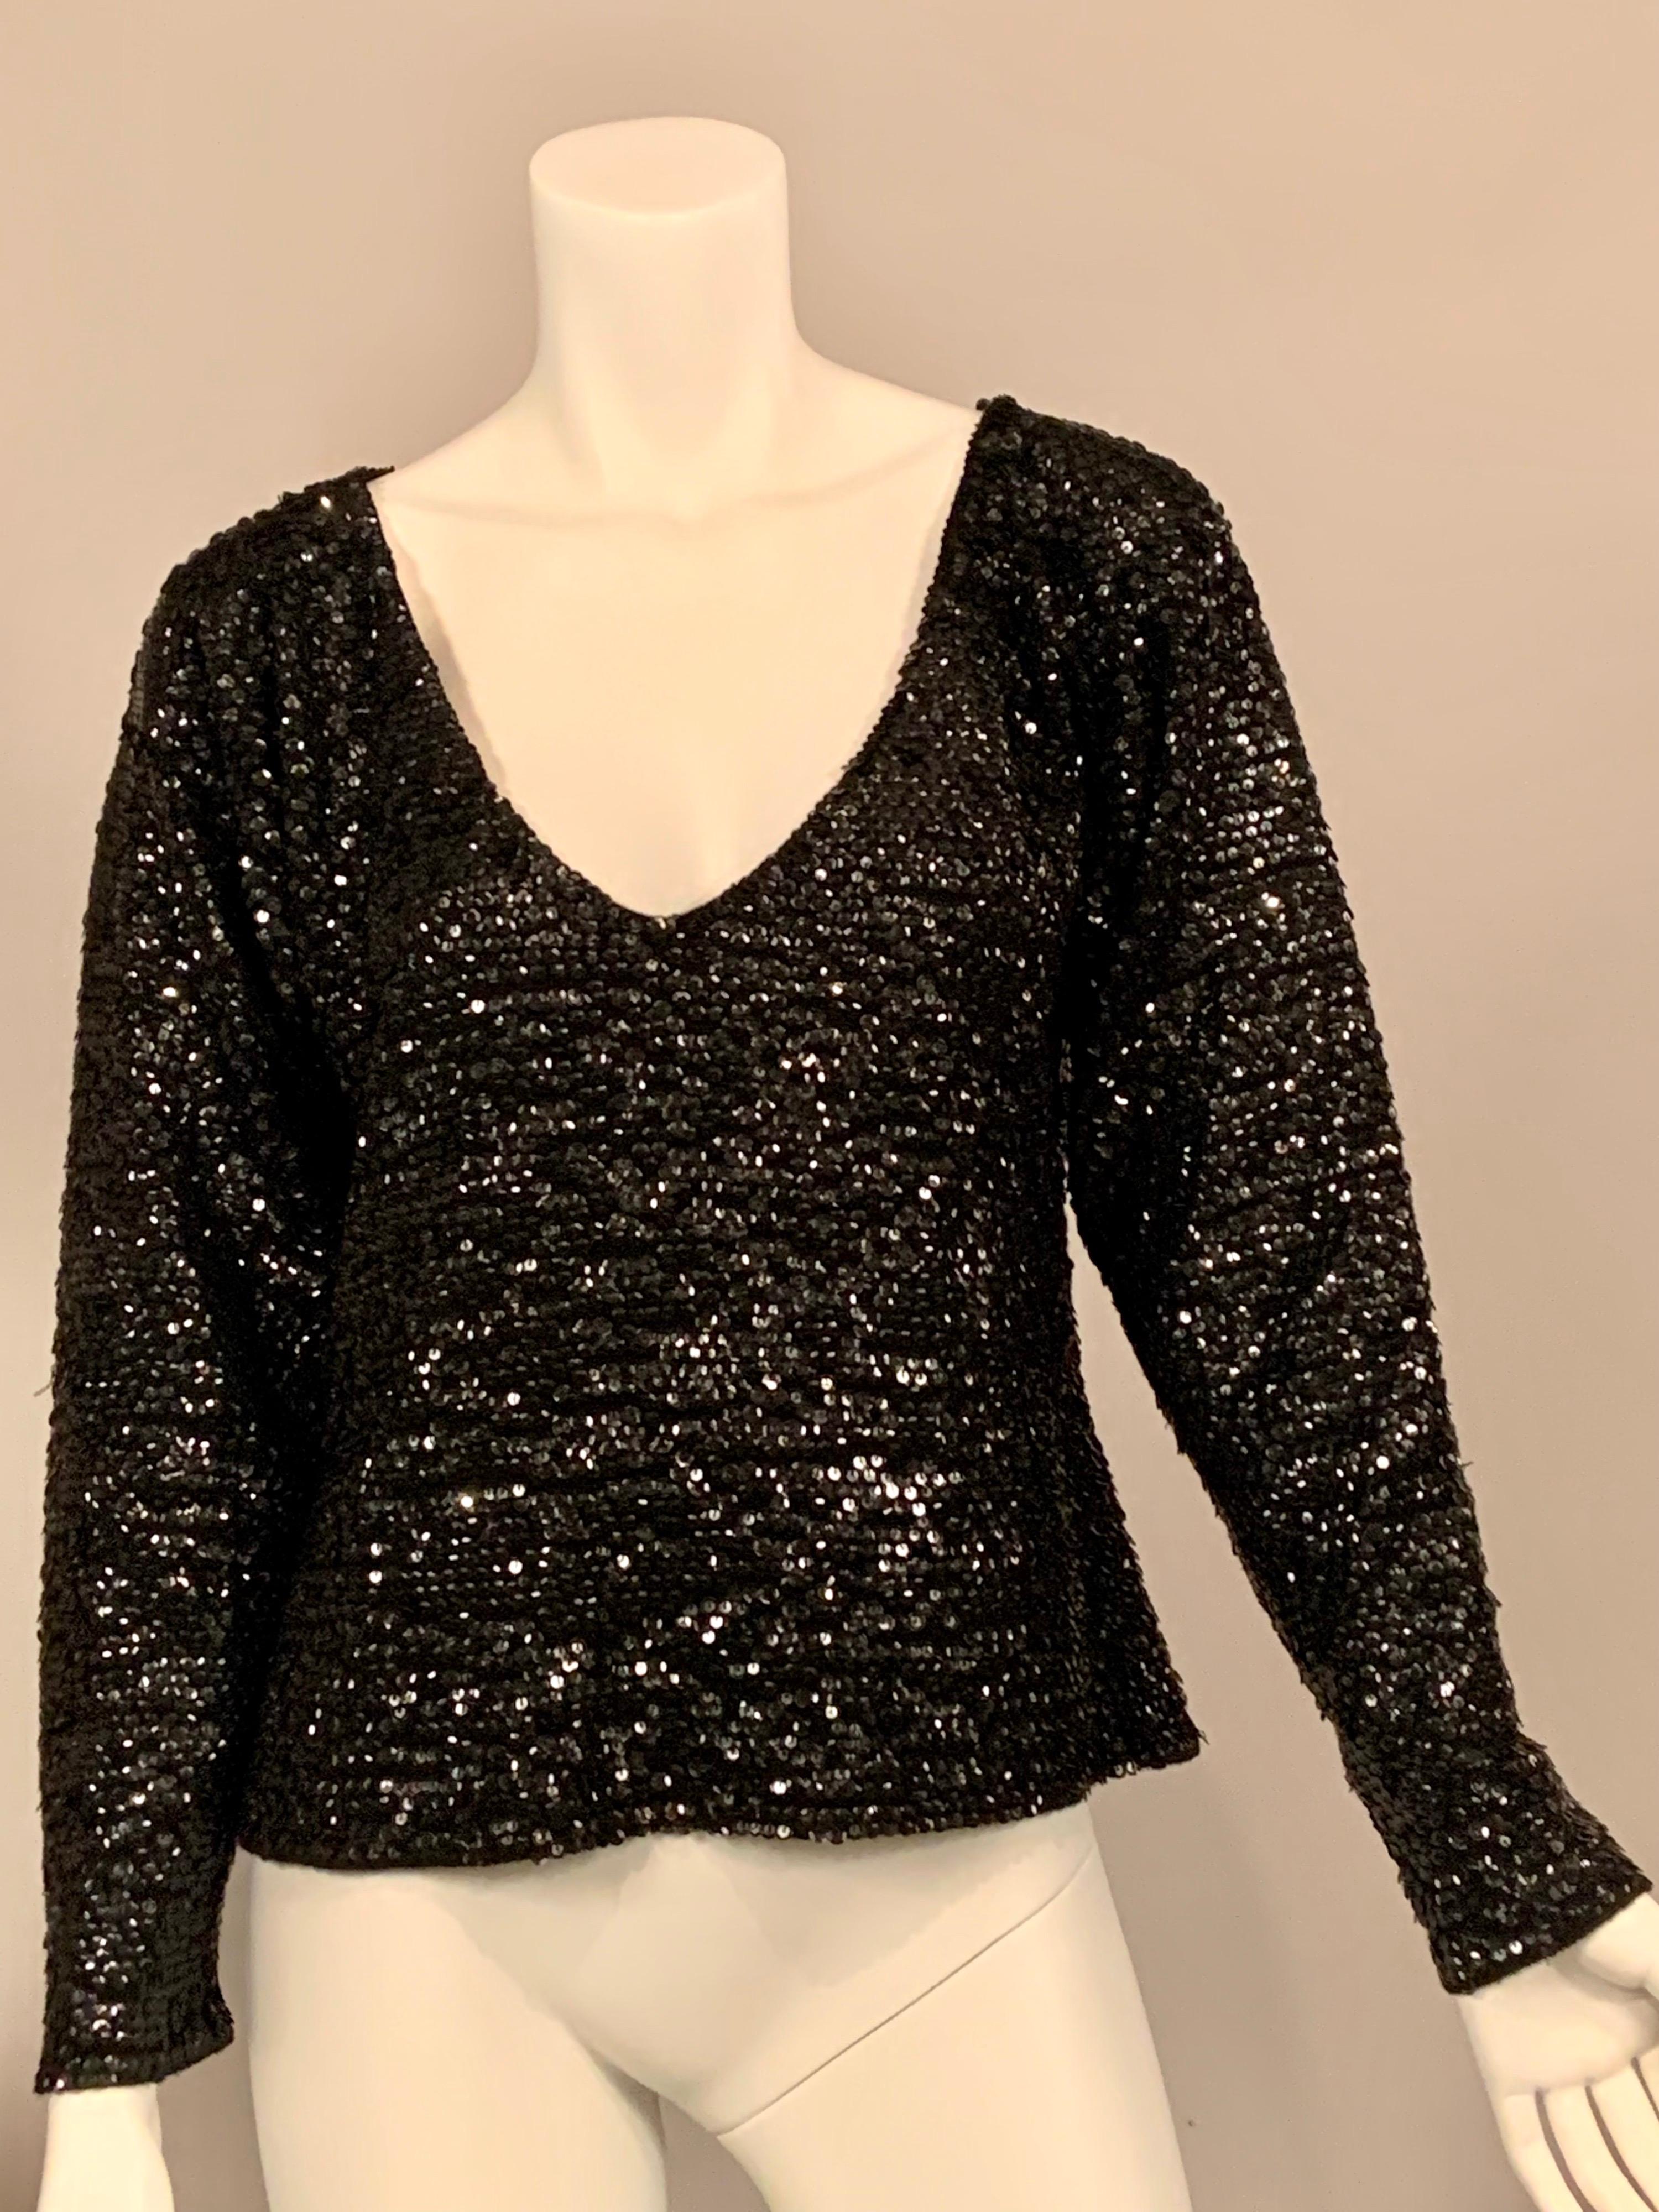 Smothered in black sequins, this soft wool sweater has a V neckline and long sleeves. It will dress up any skirt, pair of pants or jeans for a fun evening look.  It is in excellent condition, there are no labels so please check the measurements. 